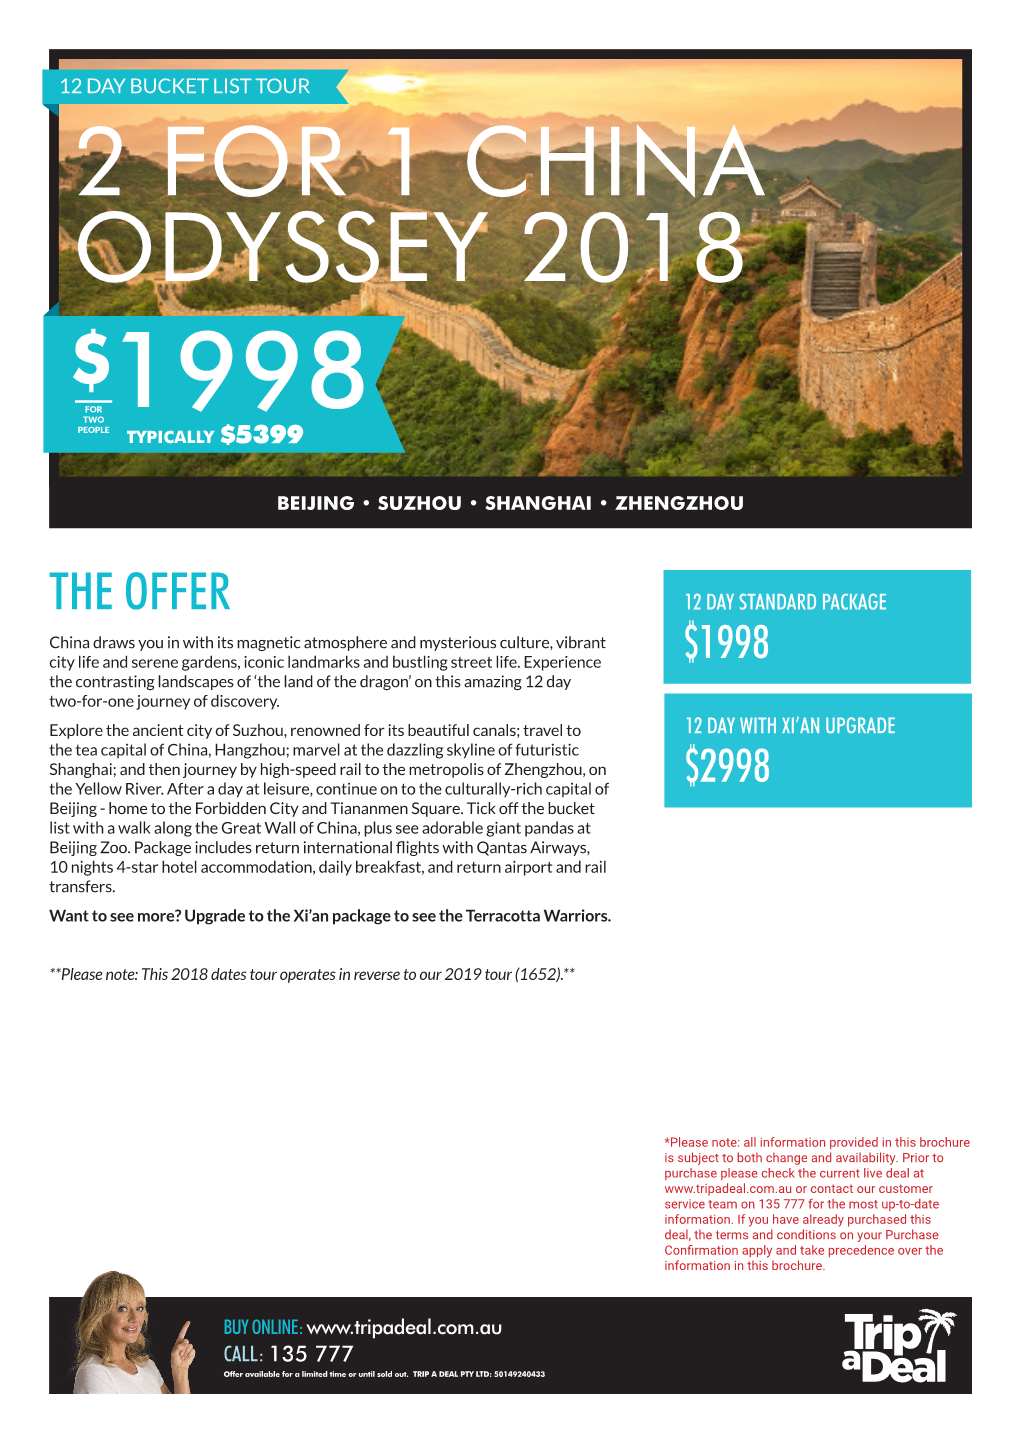 2 for 1 China Odyssey 2018 $ for Two 1998 People Typically $5399